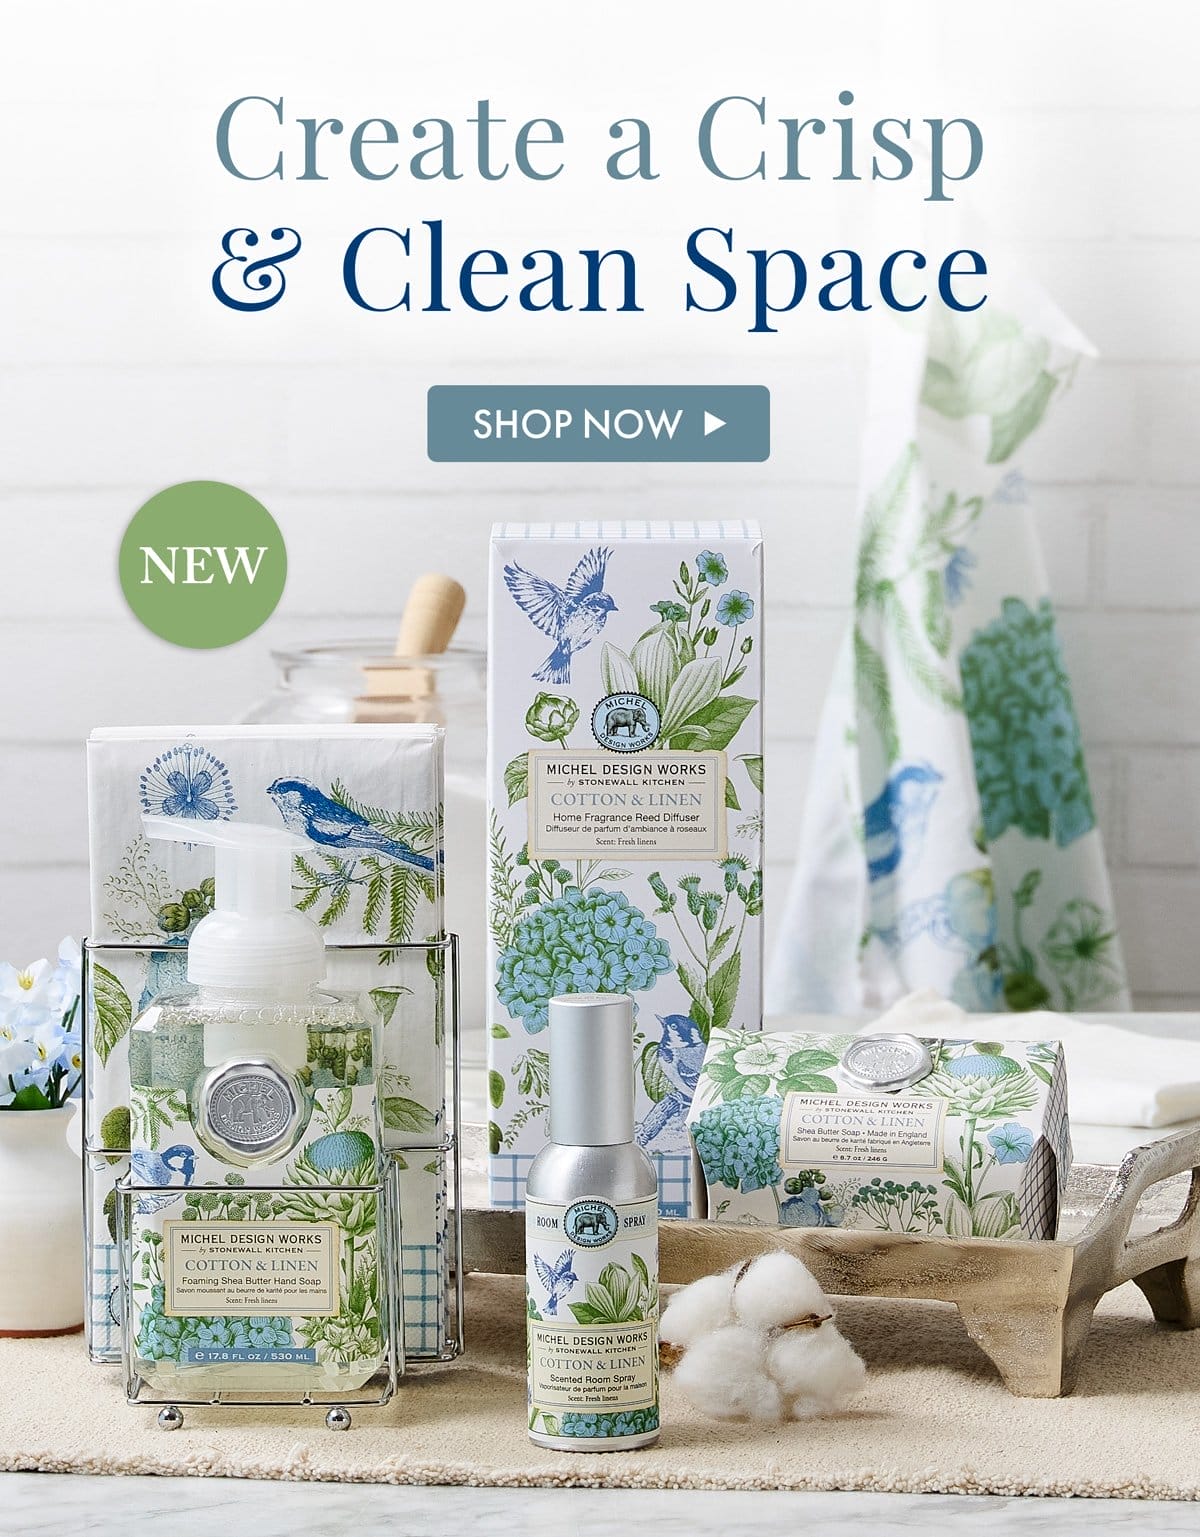 Create a Crisp and Clean Space - Shop Now